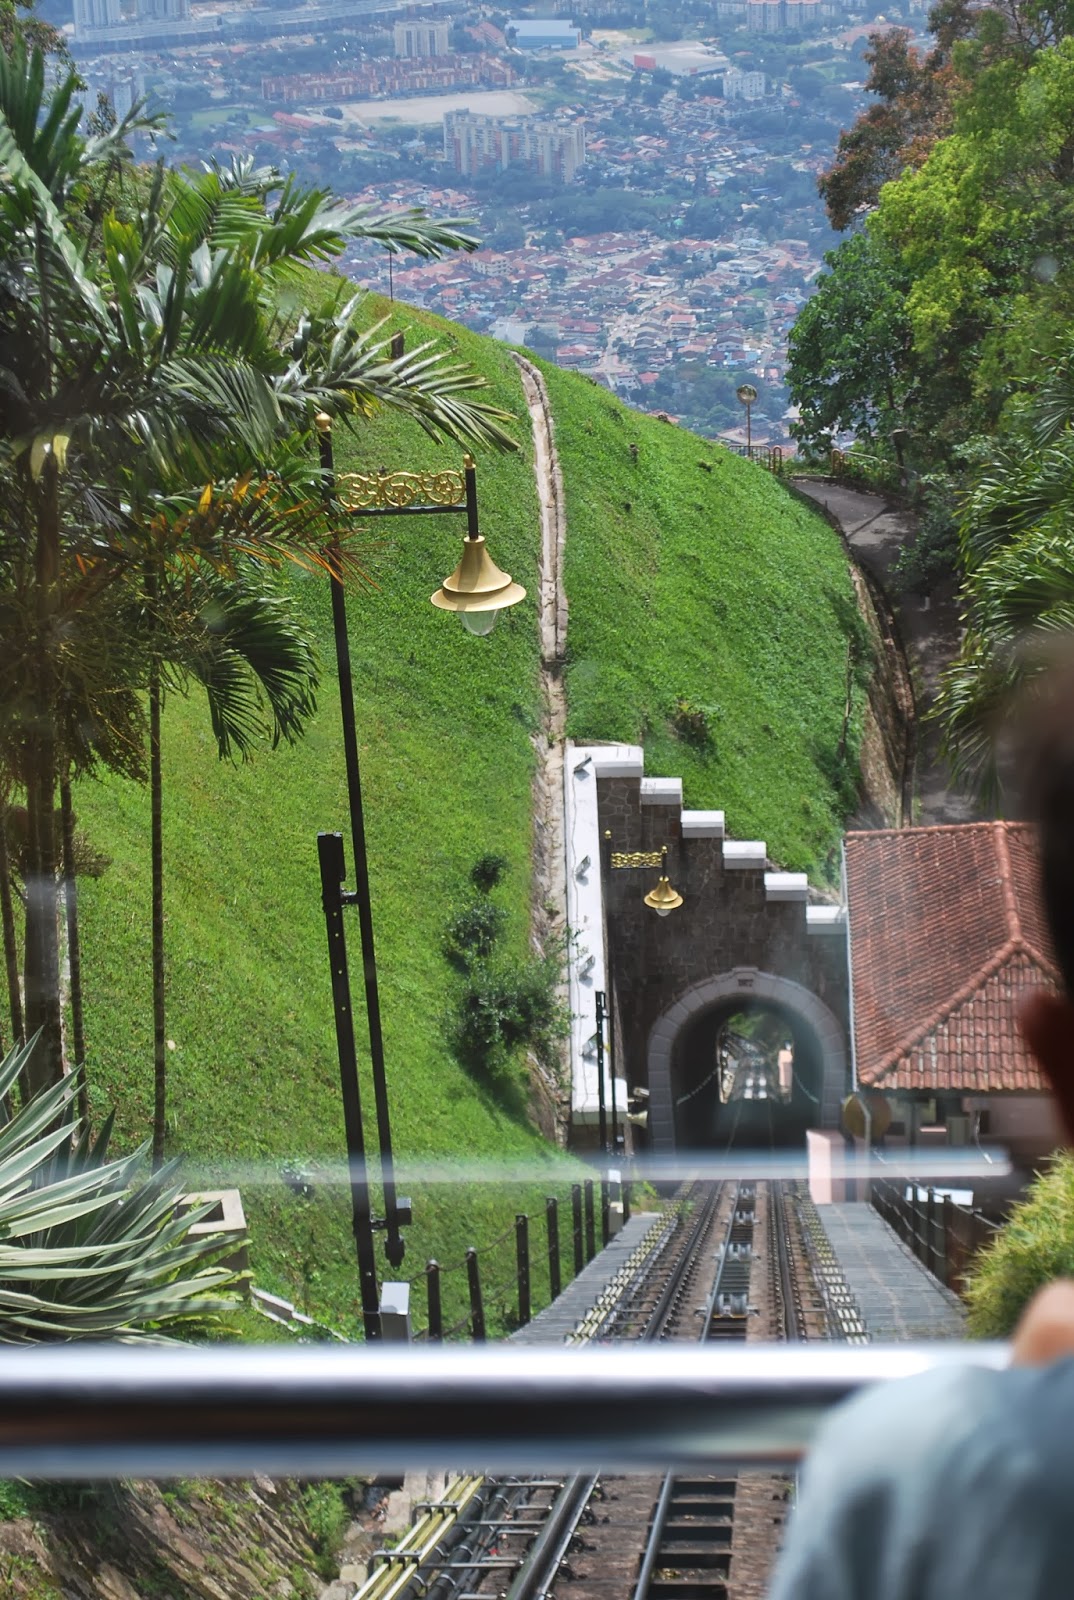 BookWorm Travel: Penang Hill, Peak of the Pearl